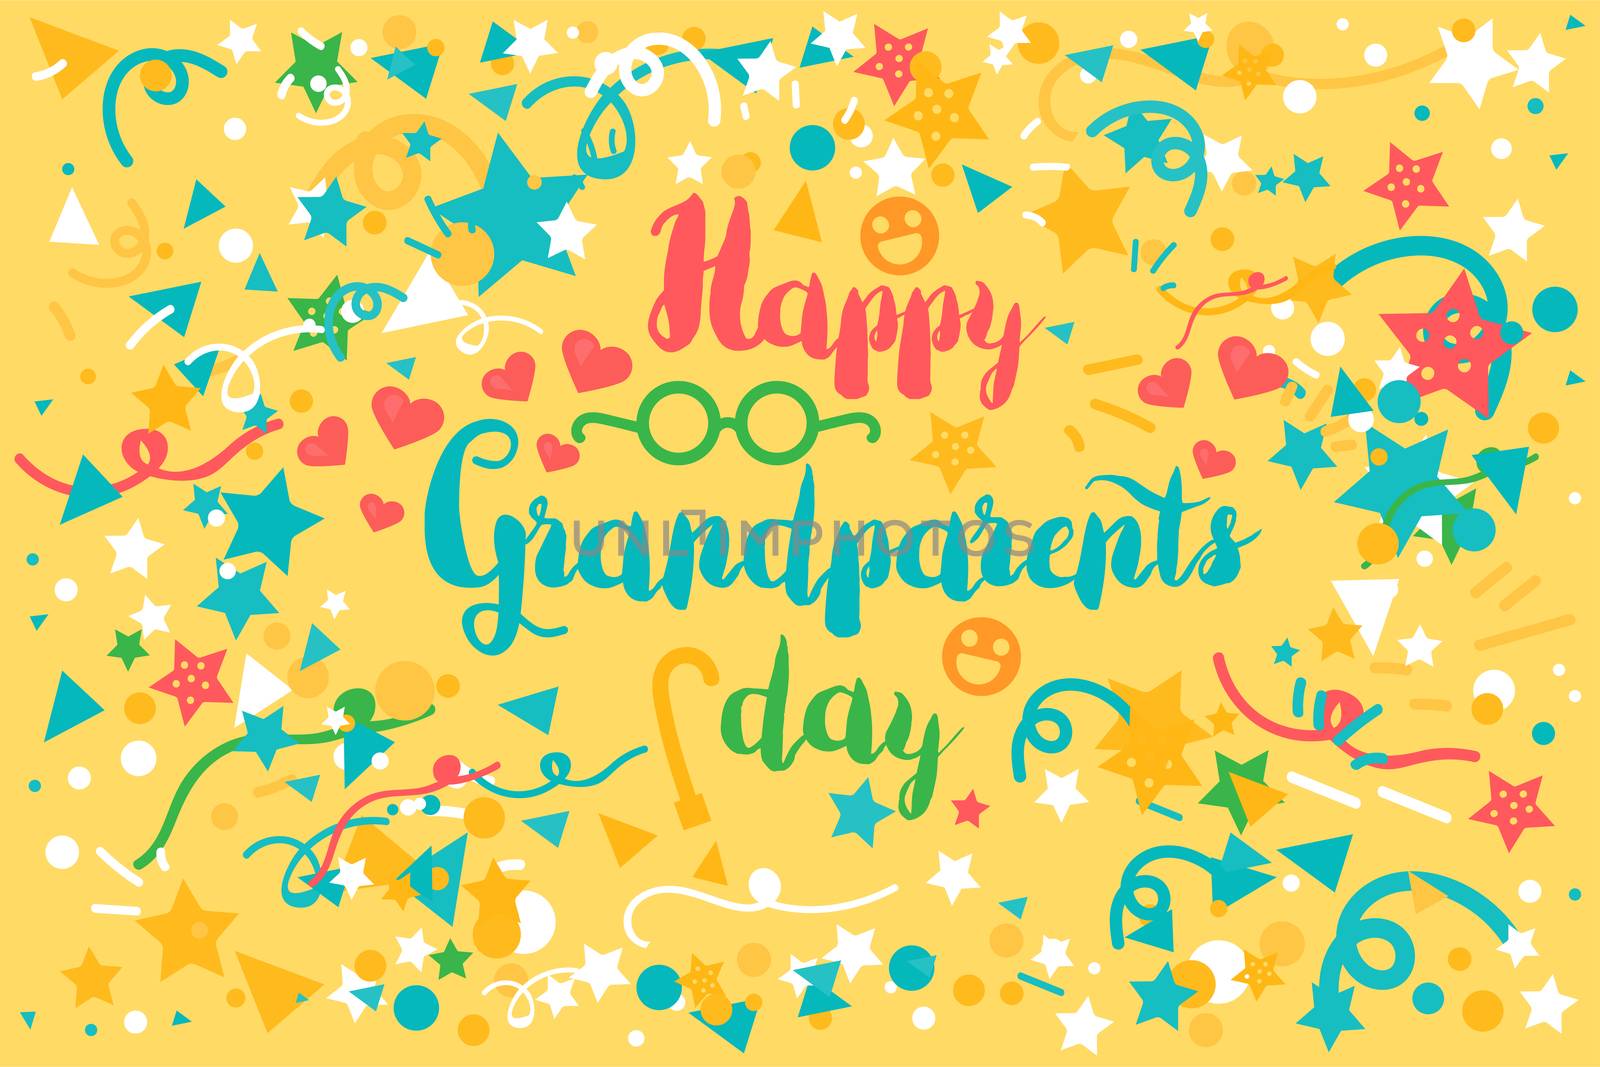 Happy Grandparents Day by barsrsind